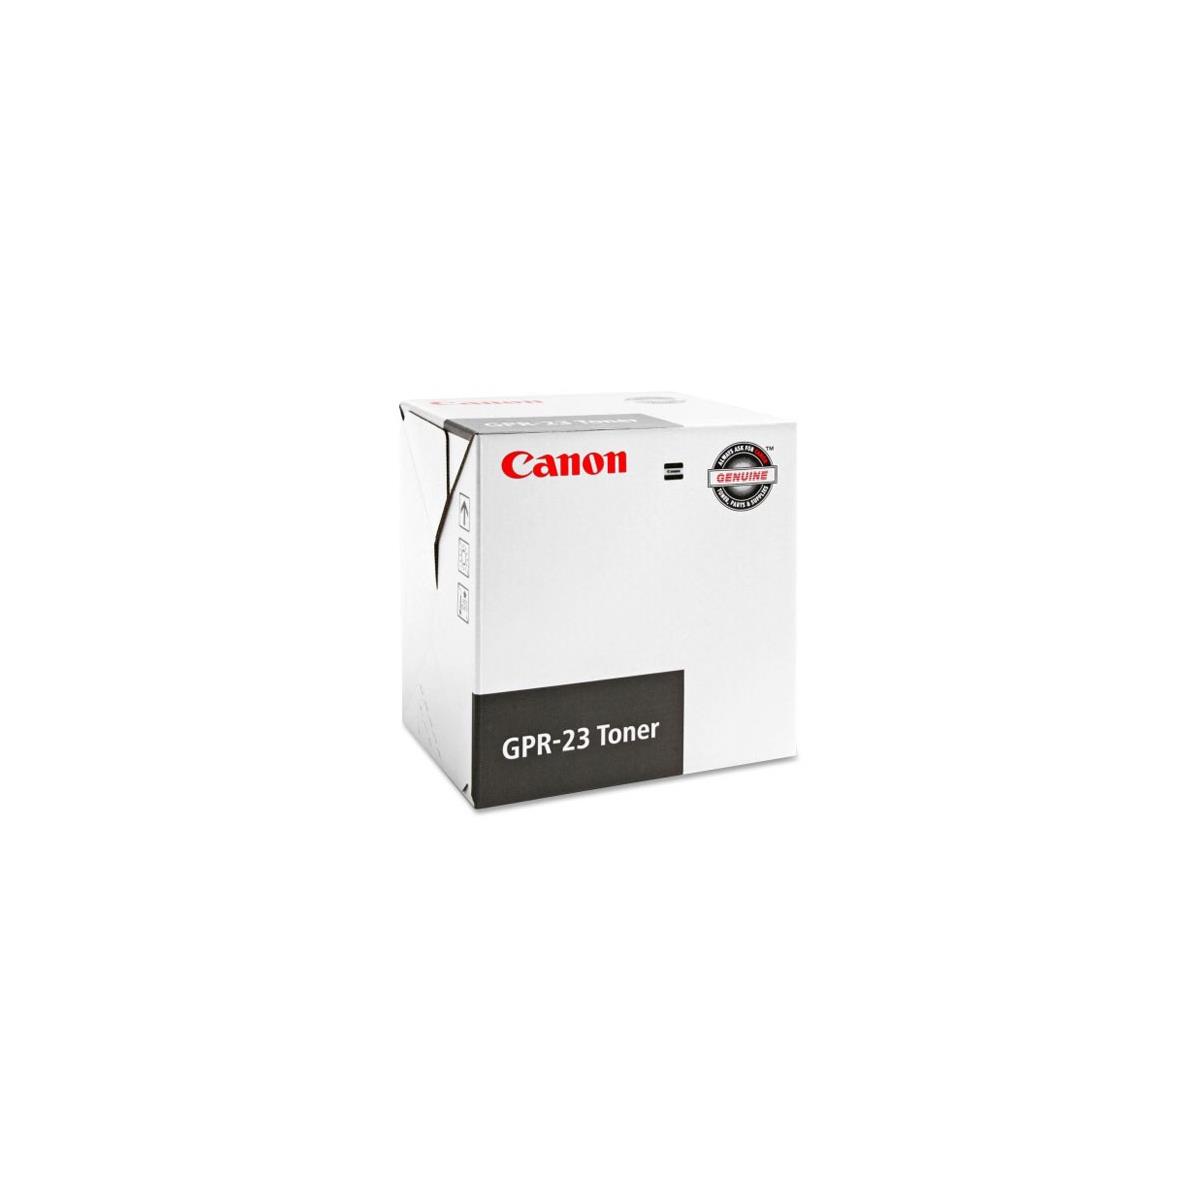 Canon GPR-23 Black Laser Toner Cartridge This genuine Canon 0452B003AA (Canon GPR-23) black laser toner cartridge is designed for the Canon imageRUNNER C2880 and C3380 laser toner copiers. It has a 24,000 page yield.